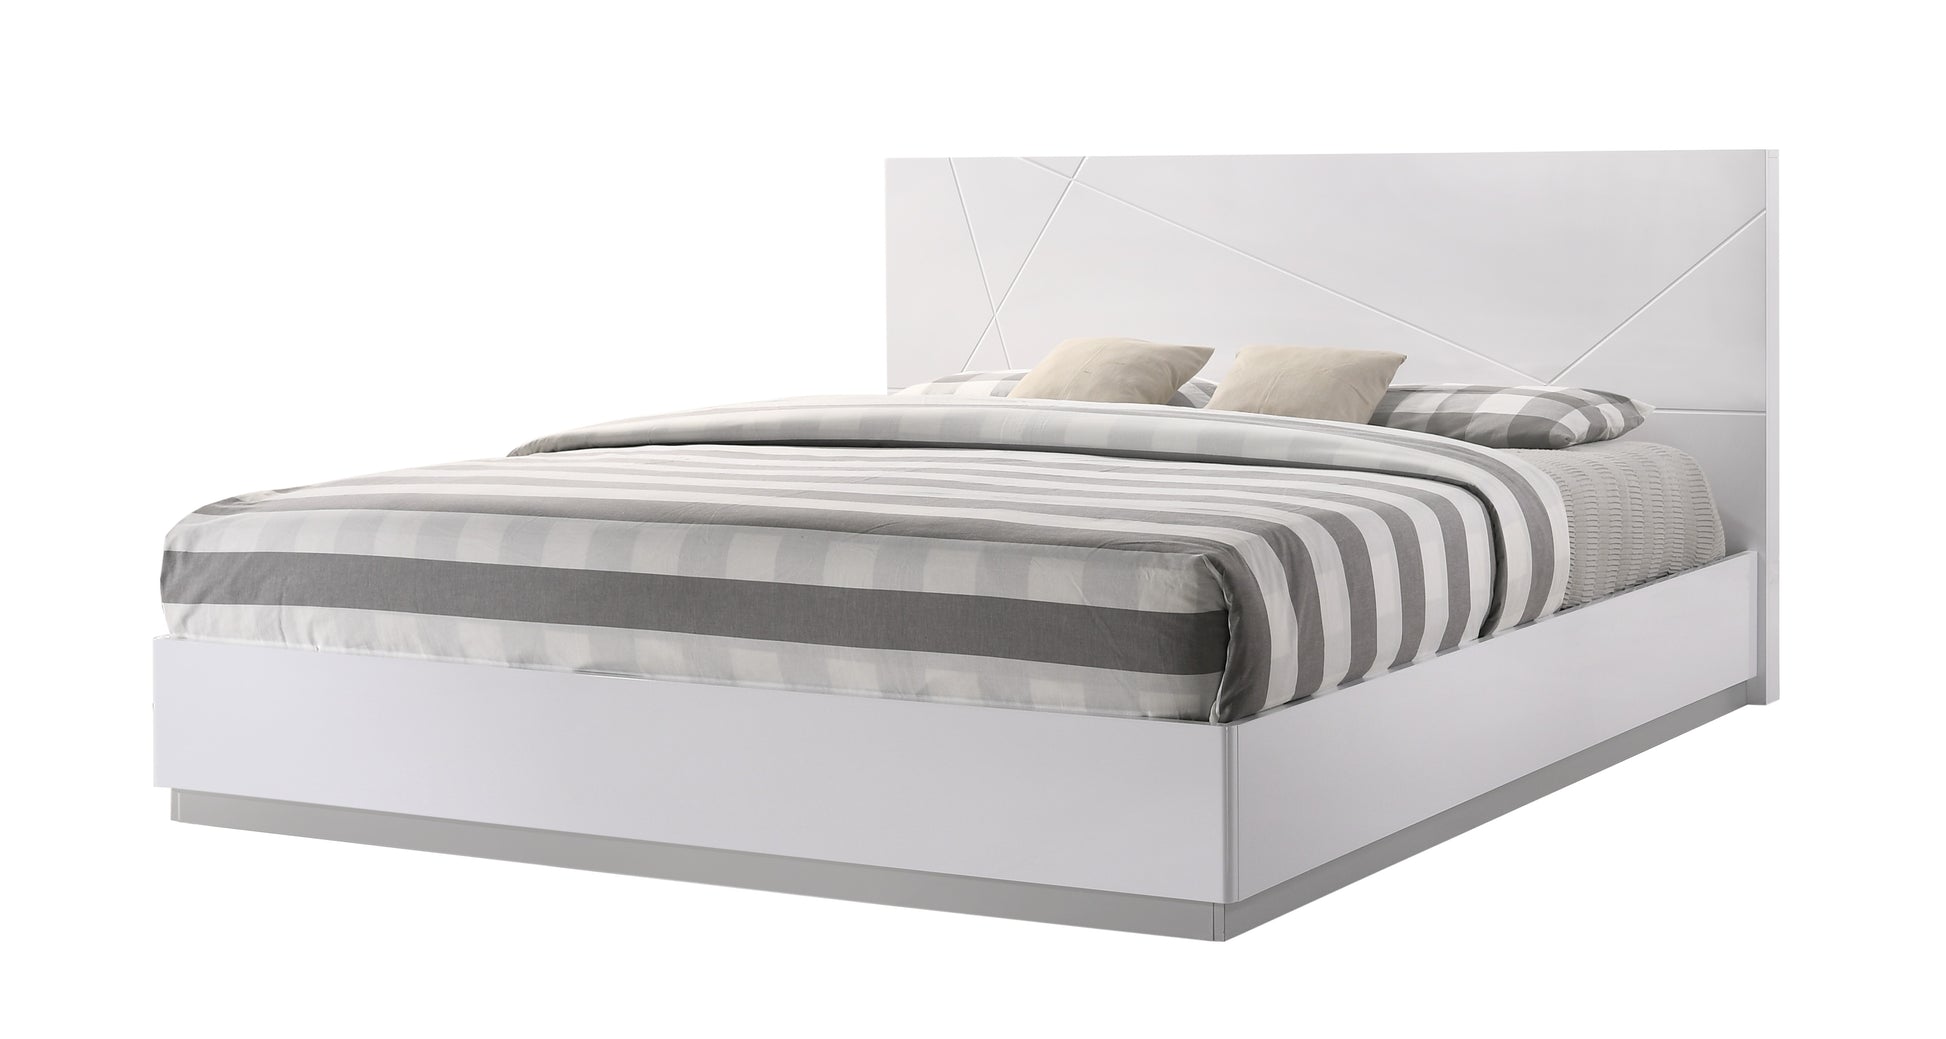 Naples King Bed by JM